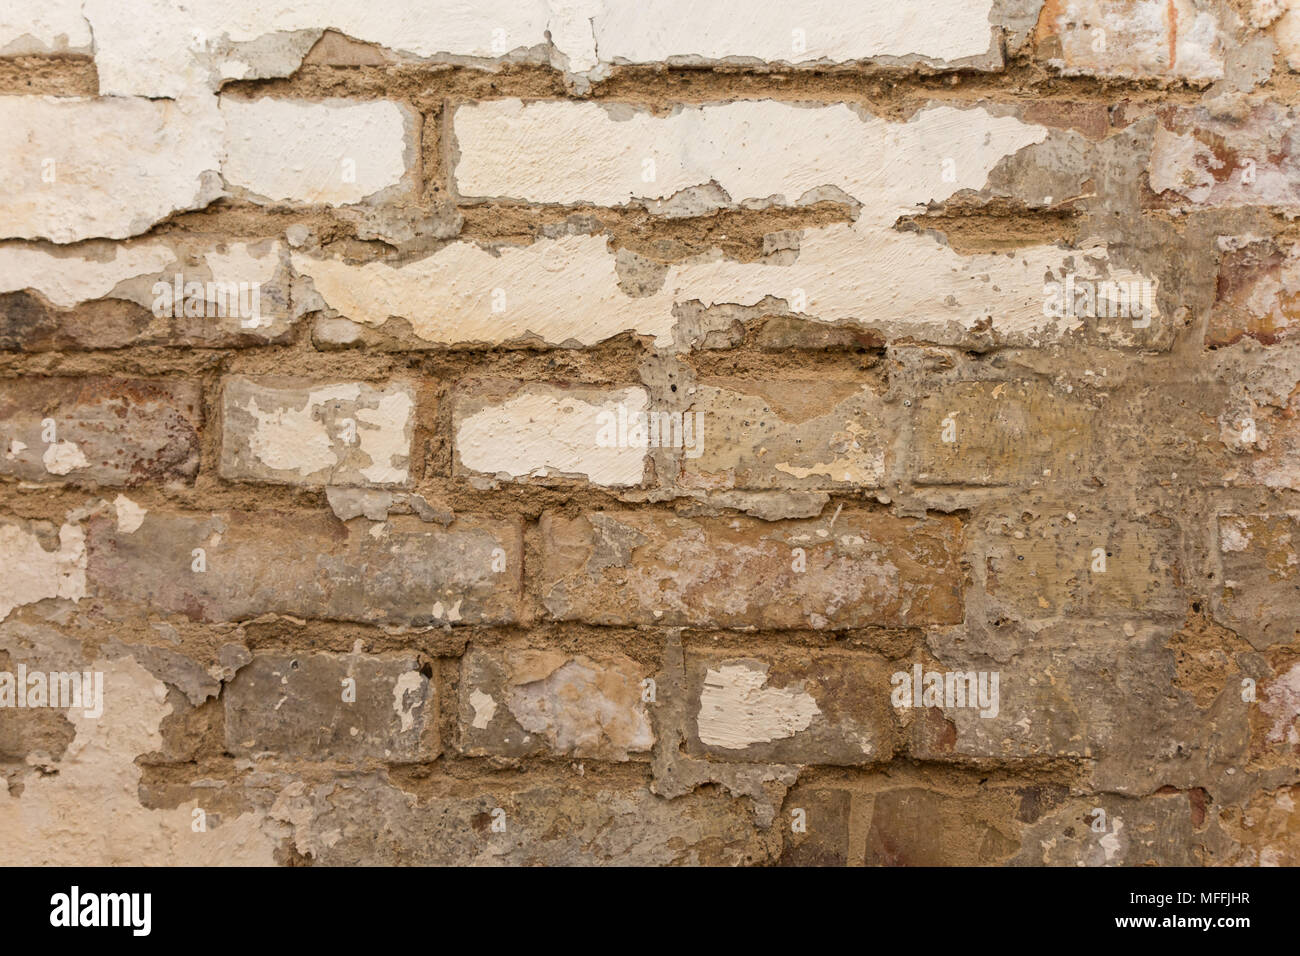 Rough brick wall with white paint coming loose Stock Photo